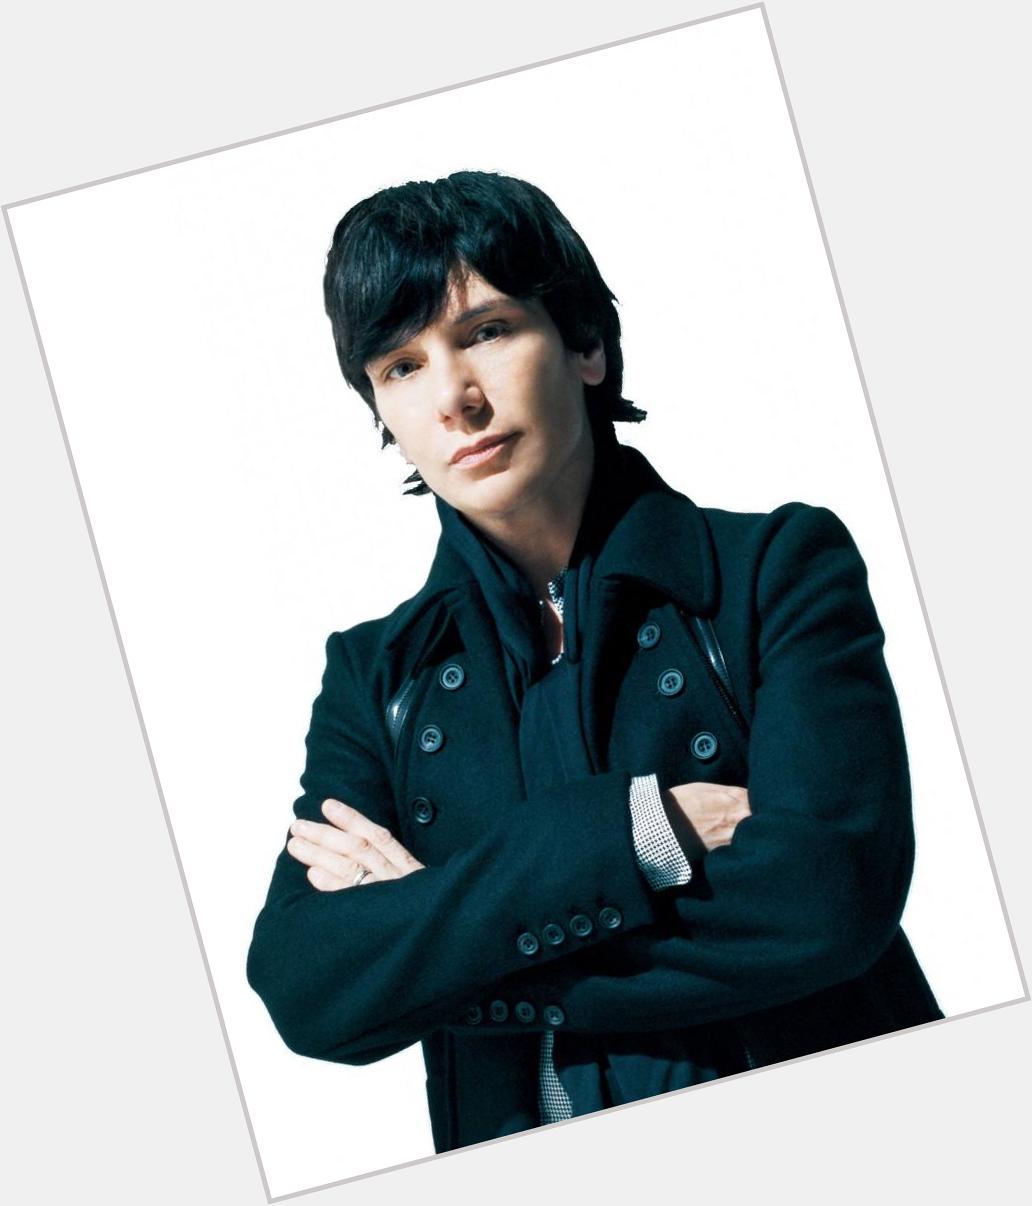 [WOW] Happy 55th birthday Eric Martin wish you all the best! 